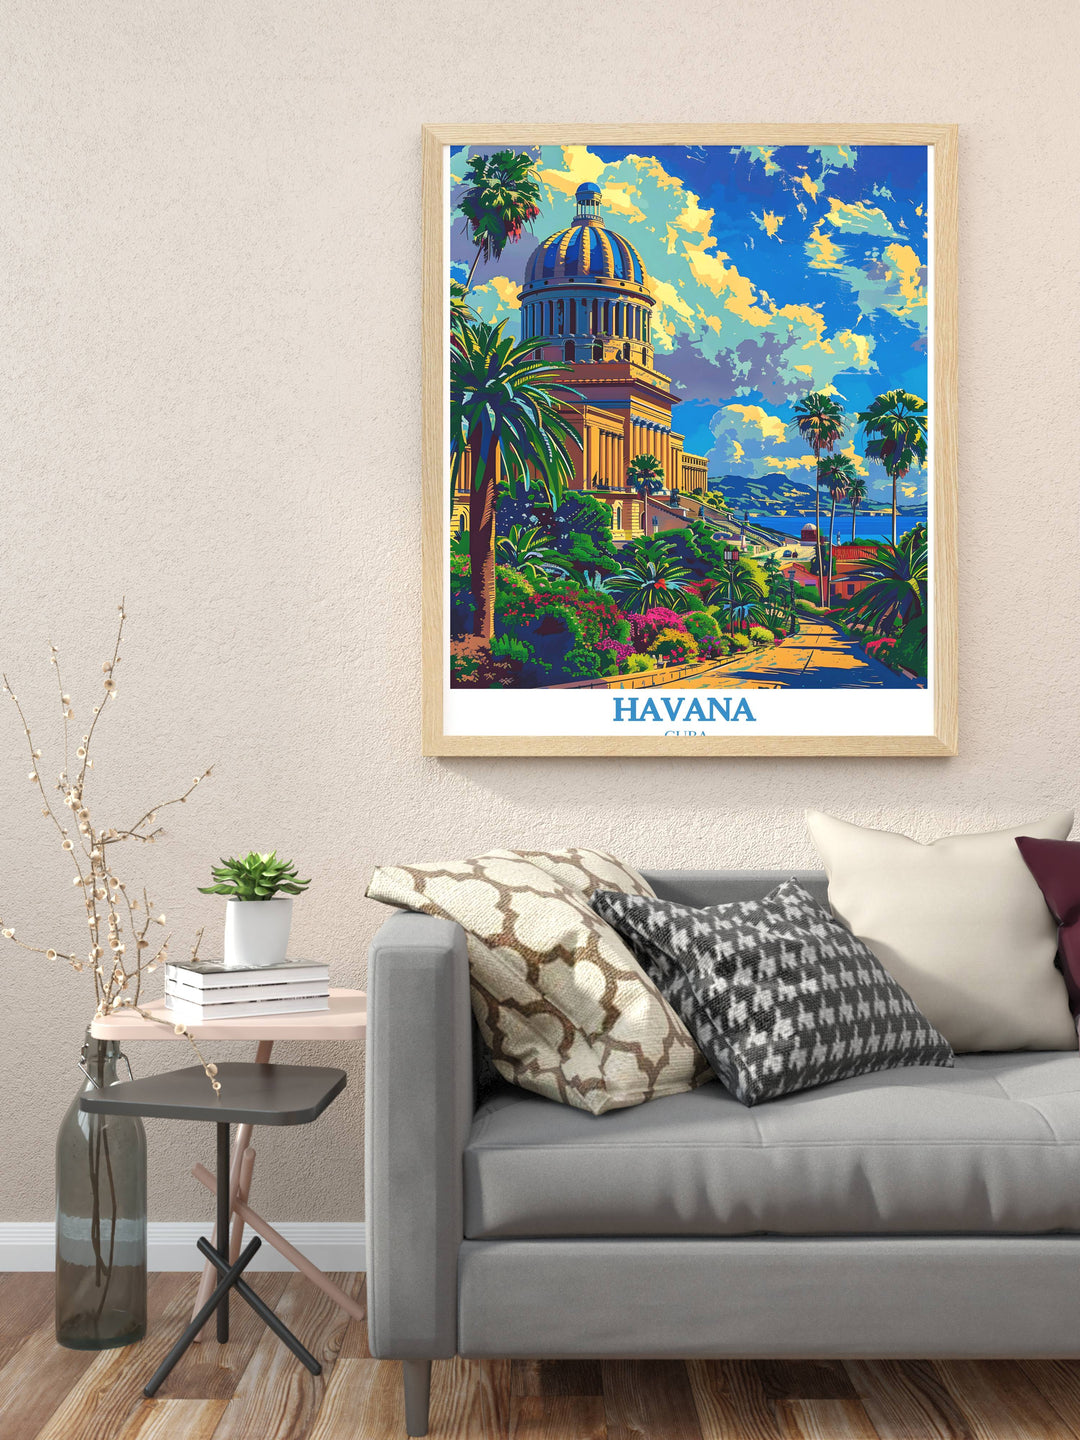 An artistic rendition of the National Capitol of Cuba in a Havana artwork collection piece, where the buildings silhouette is artfully blended with abstract elements, symbolizing Havanas fusion of tradition and creativity.